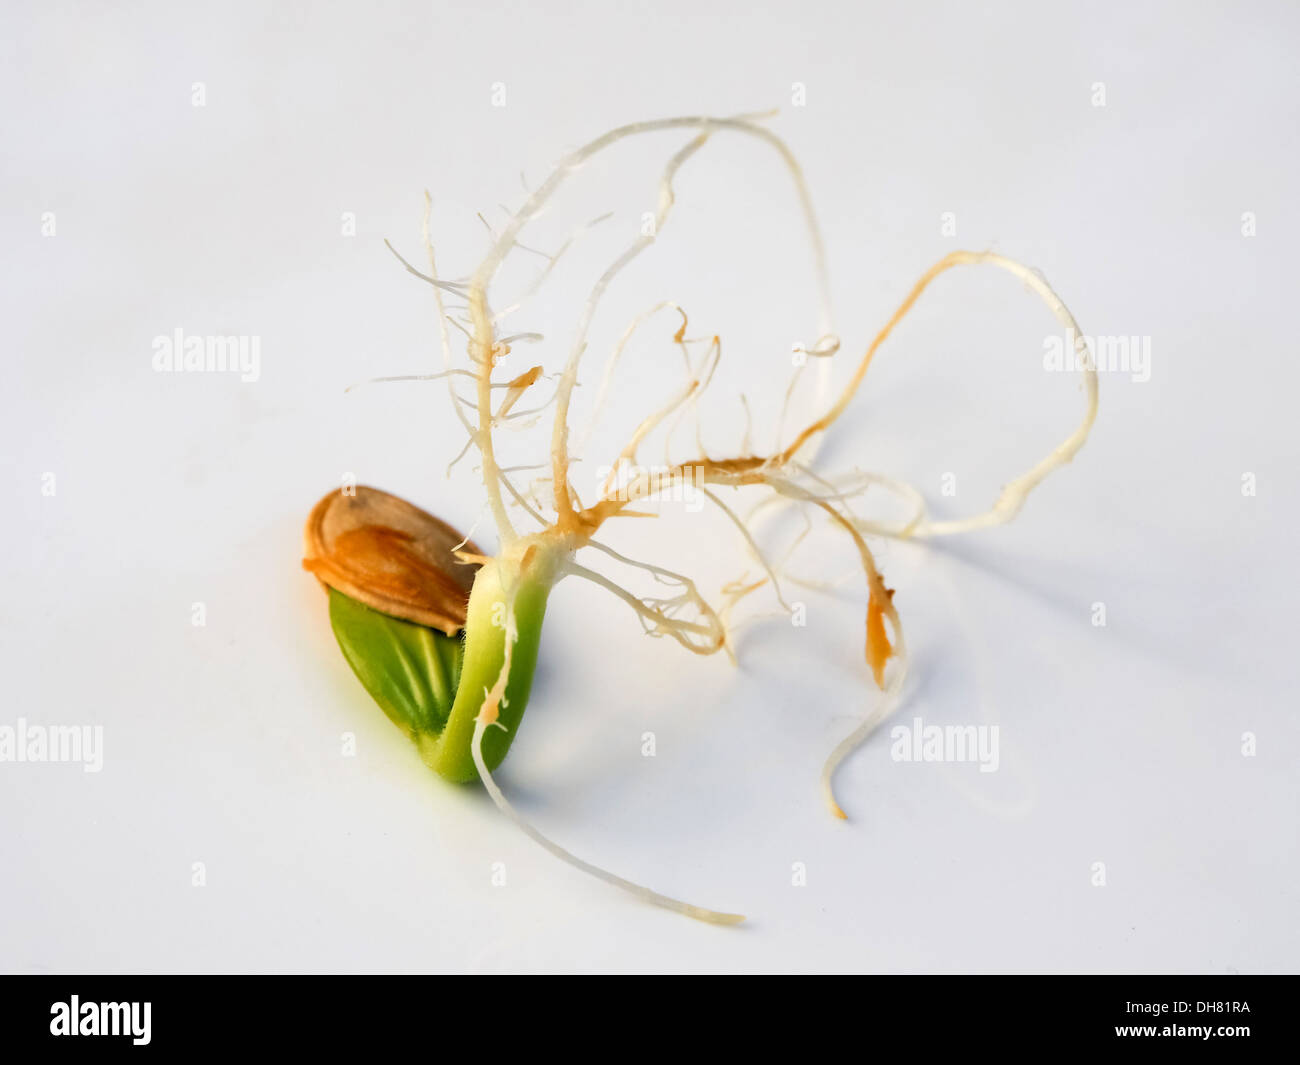 germinating pumpkin seed with sprout Stock Photo